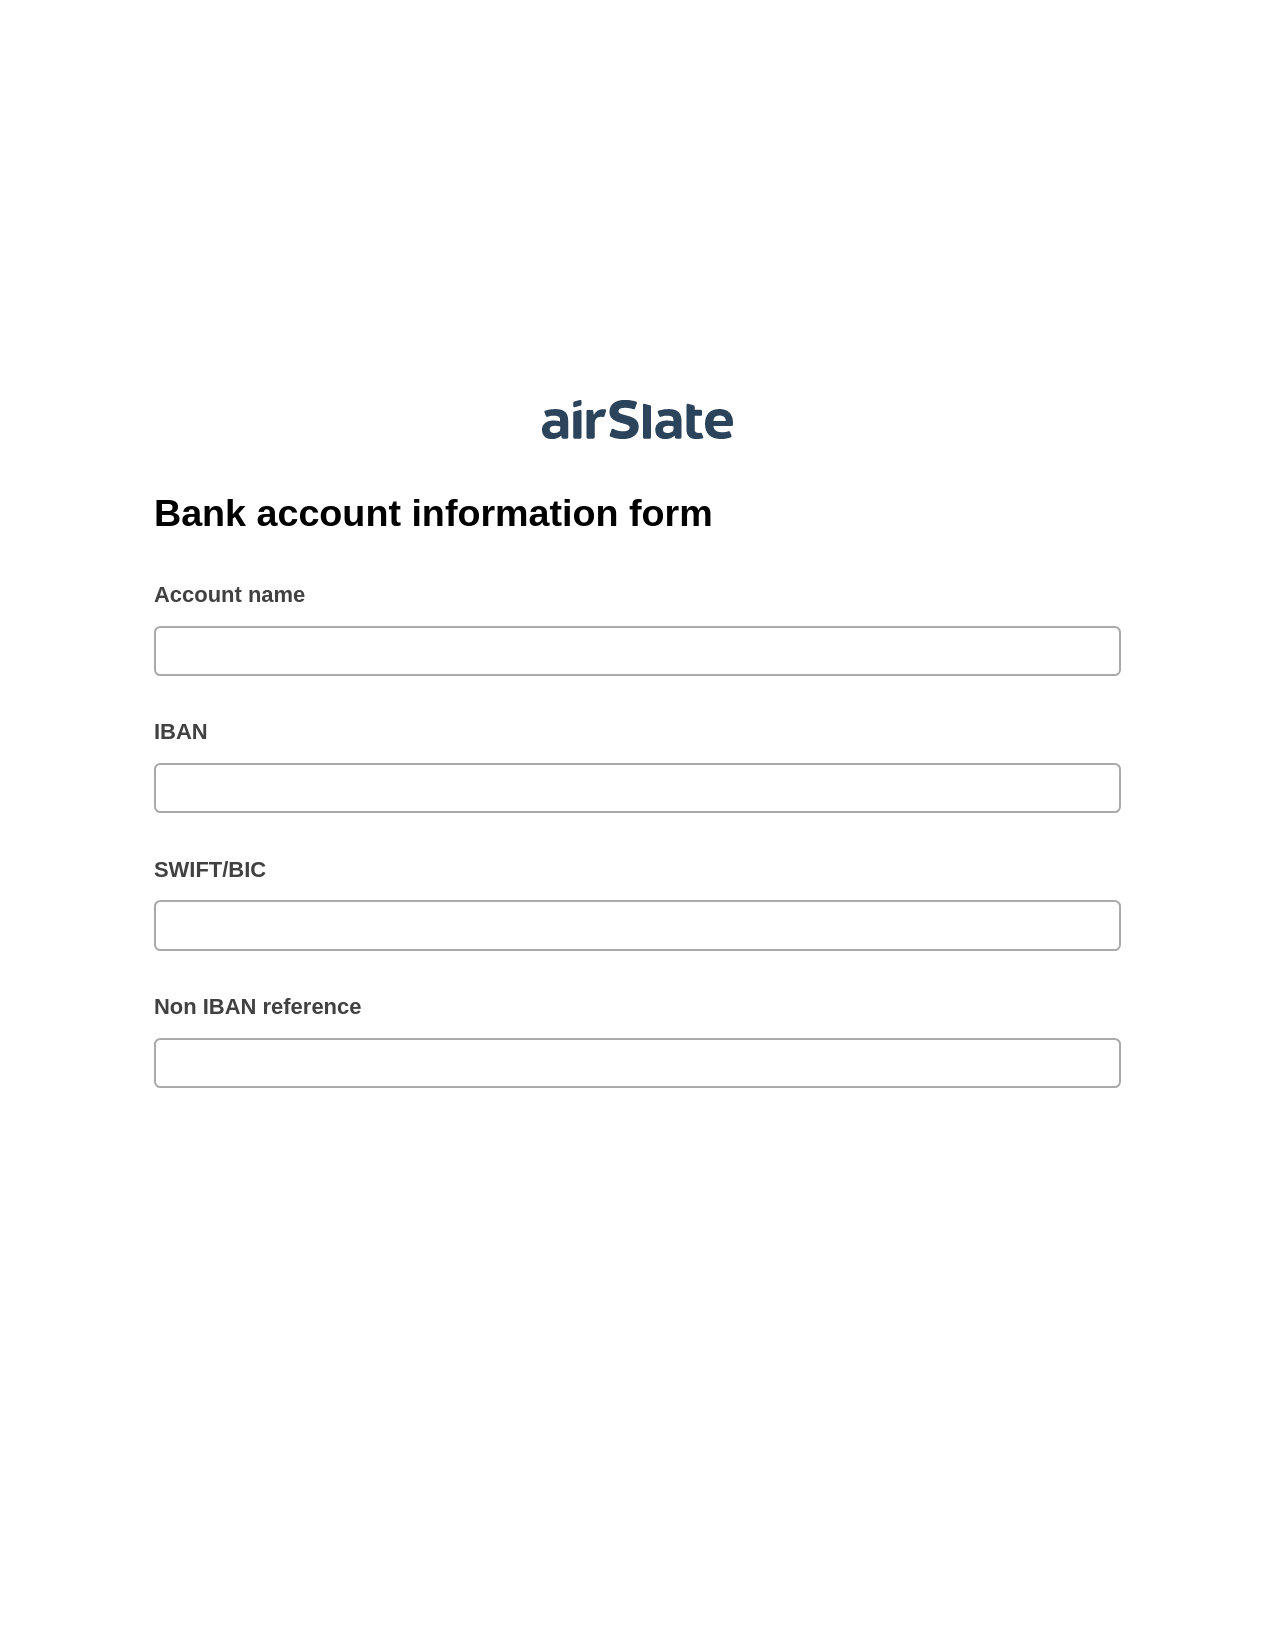 Multirole Bank account information form Pre-fill from Google Sheet Dropdown Options Bot, Pre-fill with Custom Data Bot, Post-finish Document Bot